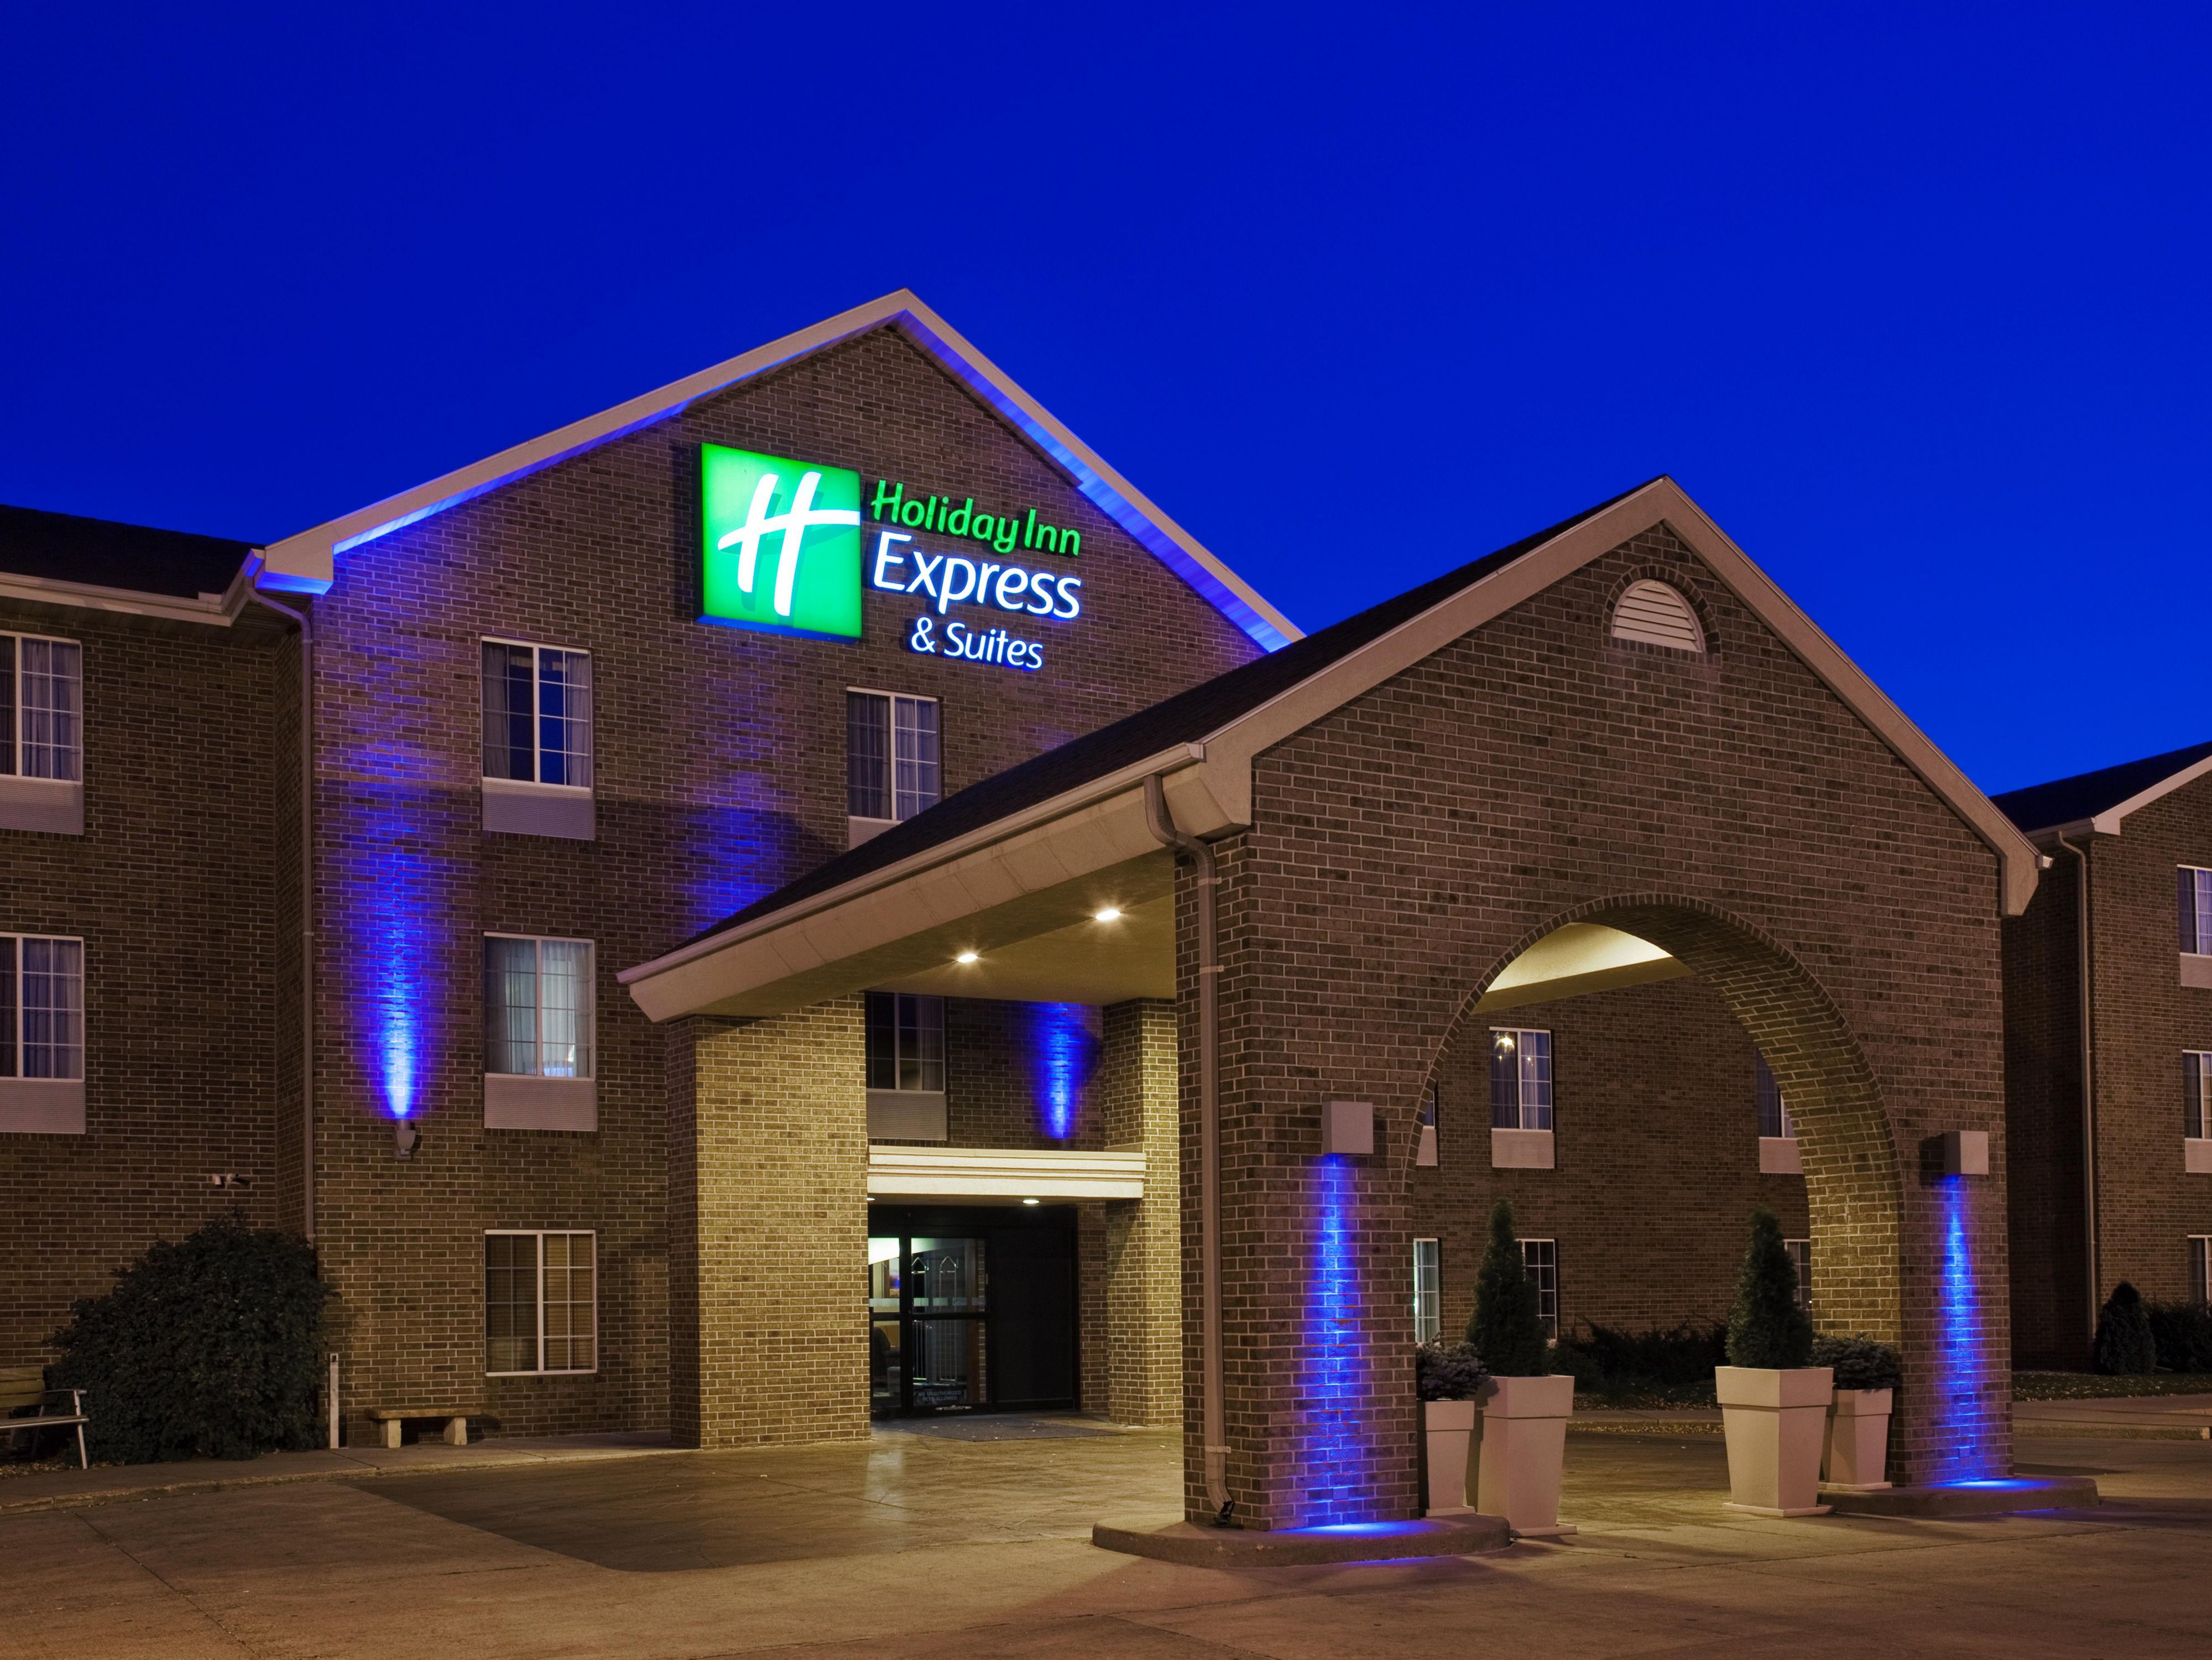 holiday inn express and suites sioux falls 4263390803 4x3